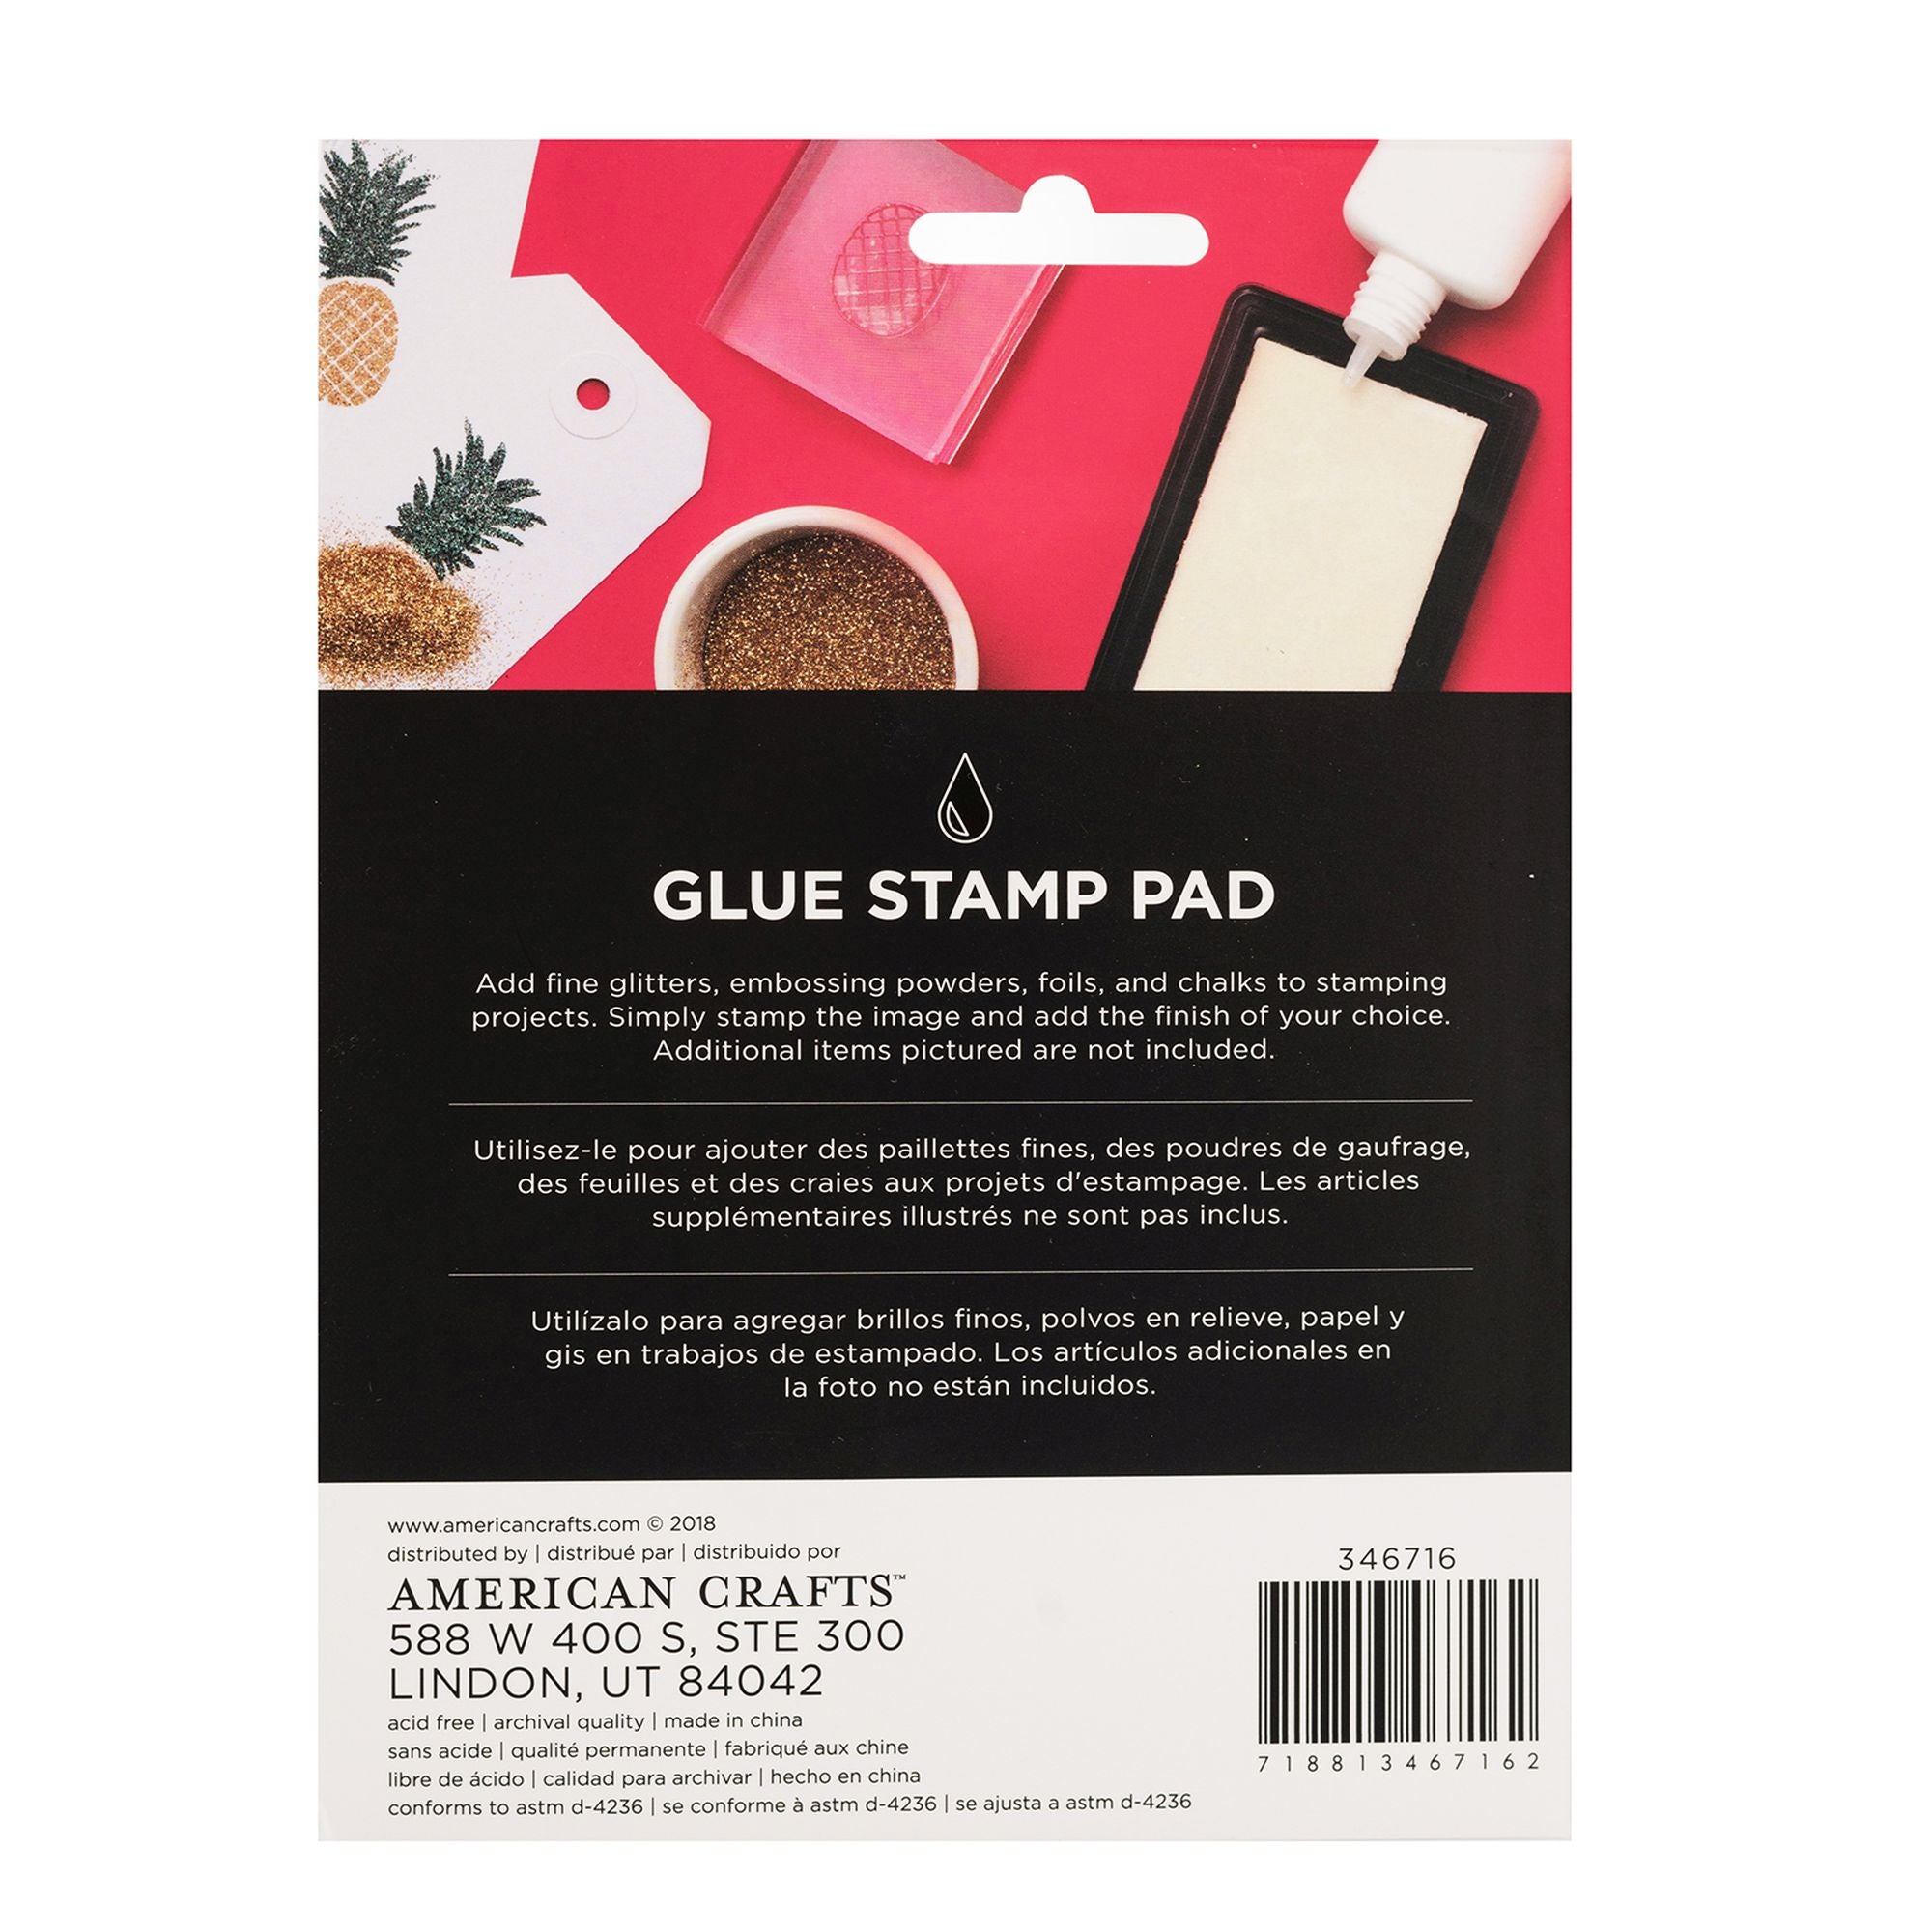 American Craft Moxy Glitter And Embossing Glue Stamp Pad 1Set